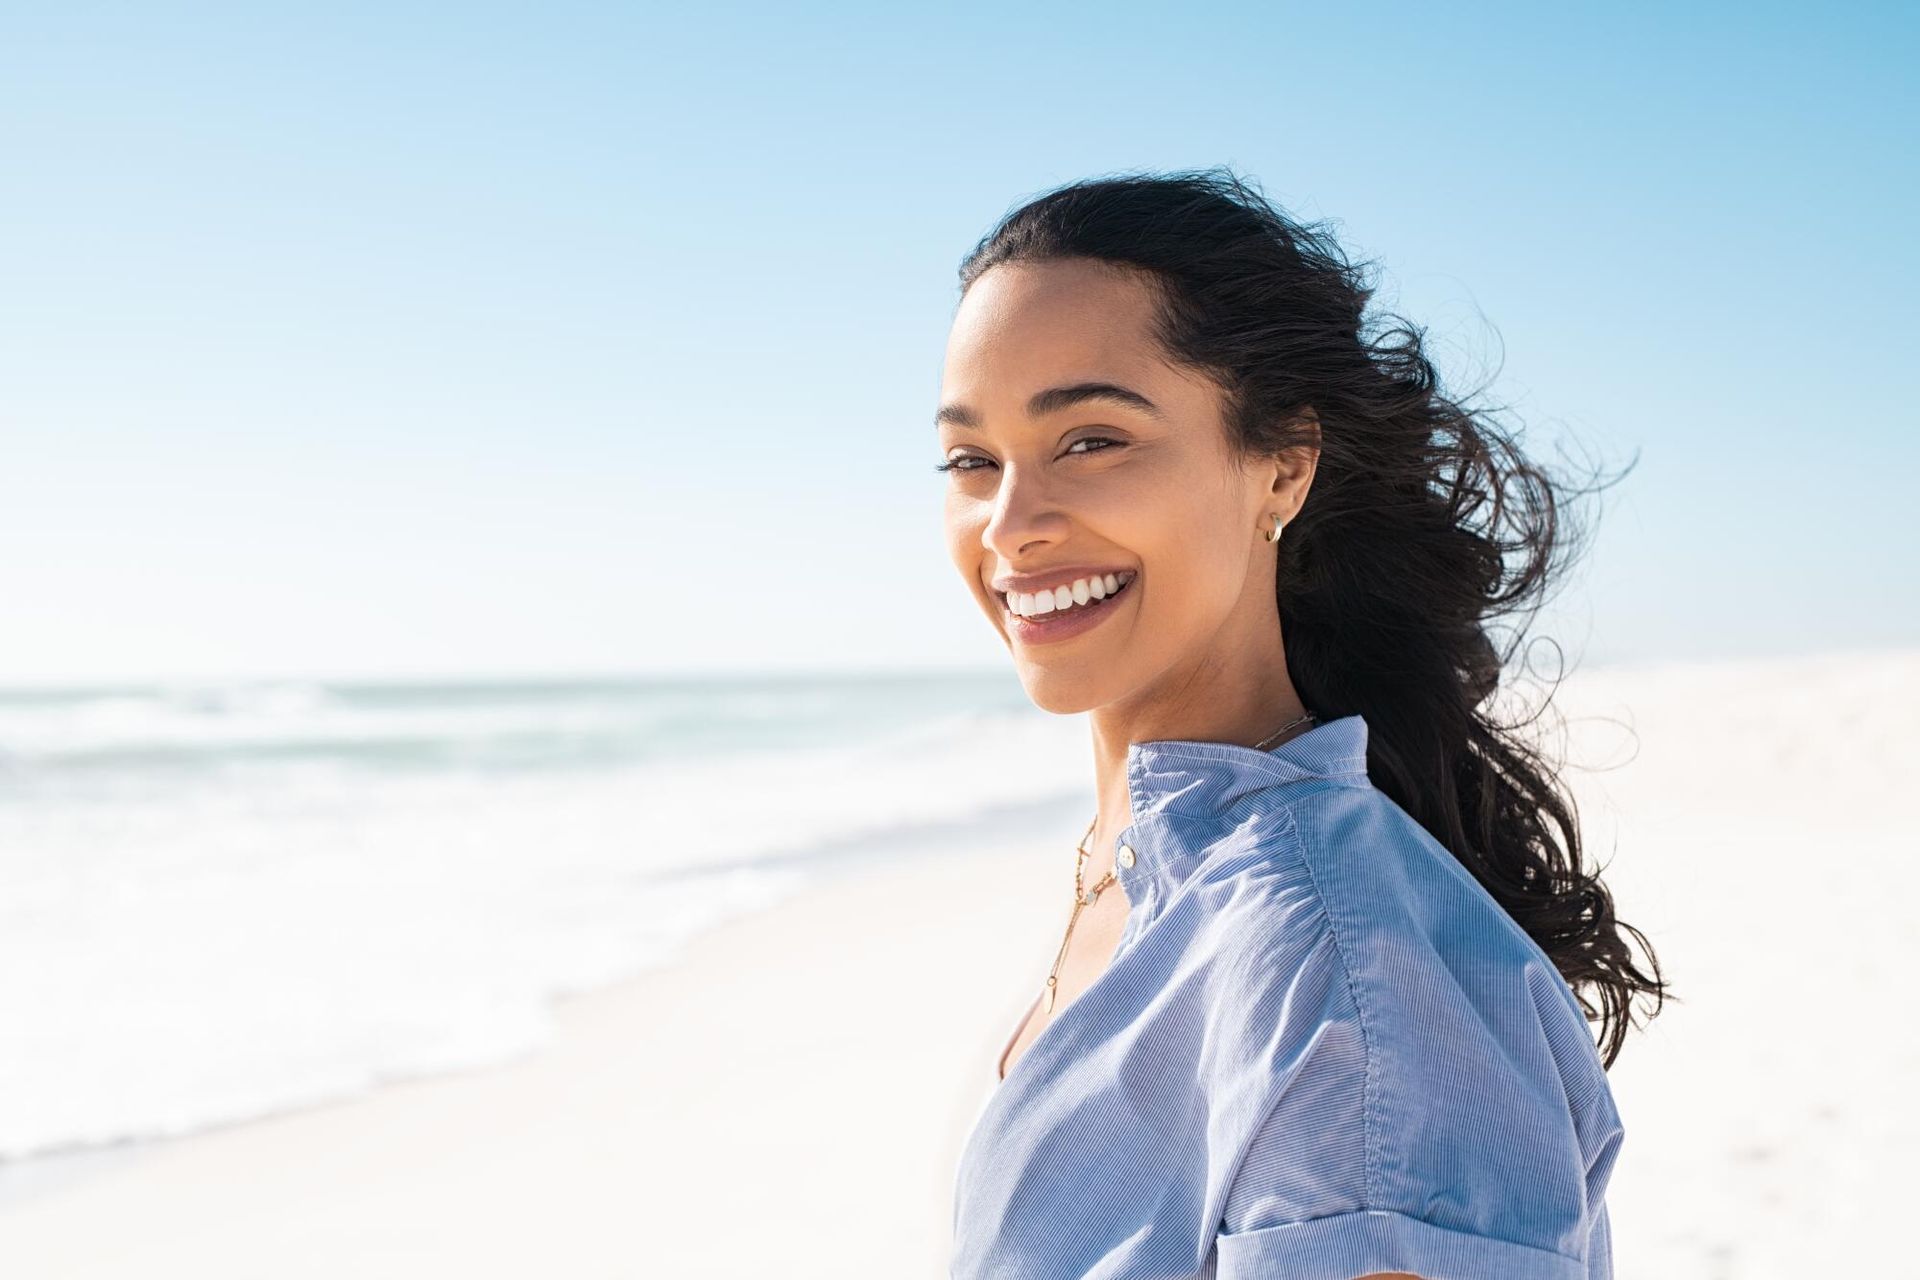 A woman is smiling on the beach and looking at the camera.